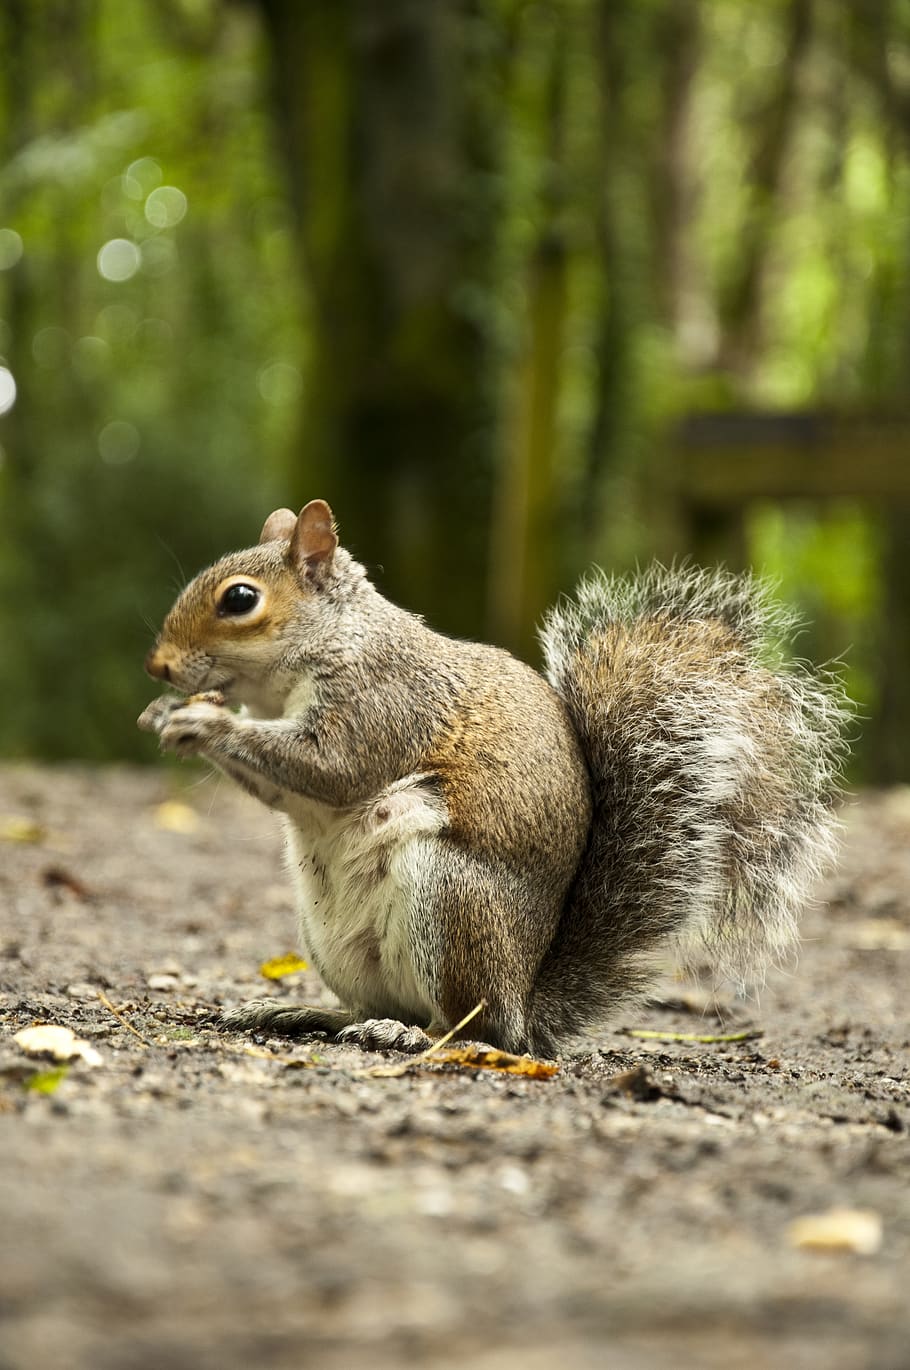 Selective Focus Photography of Squirrel, animal, blur, close-up